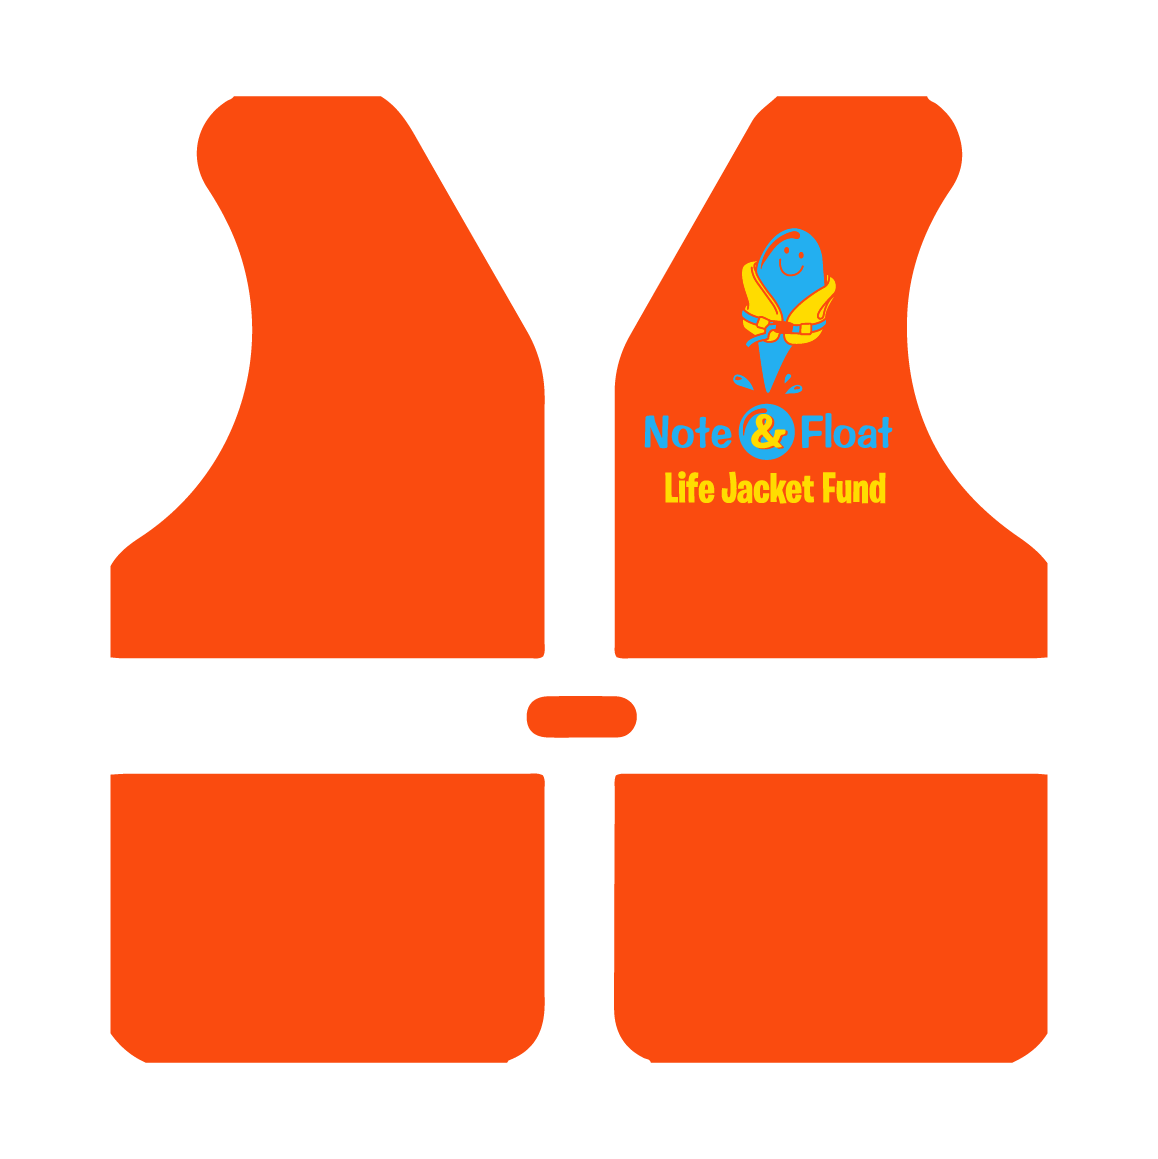 Buy, Buckle, Save - Raising Funds to Provide Life Jackets for Kids shirt design - zoomed